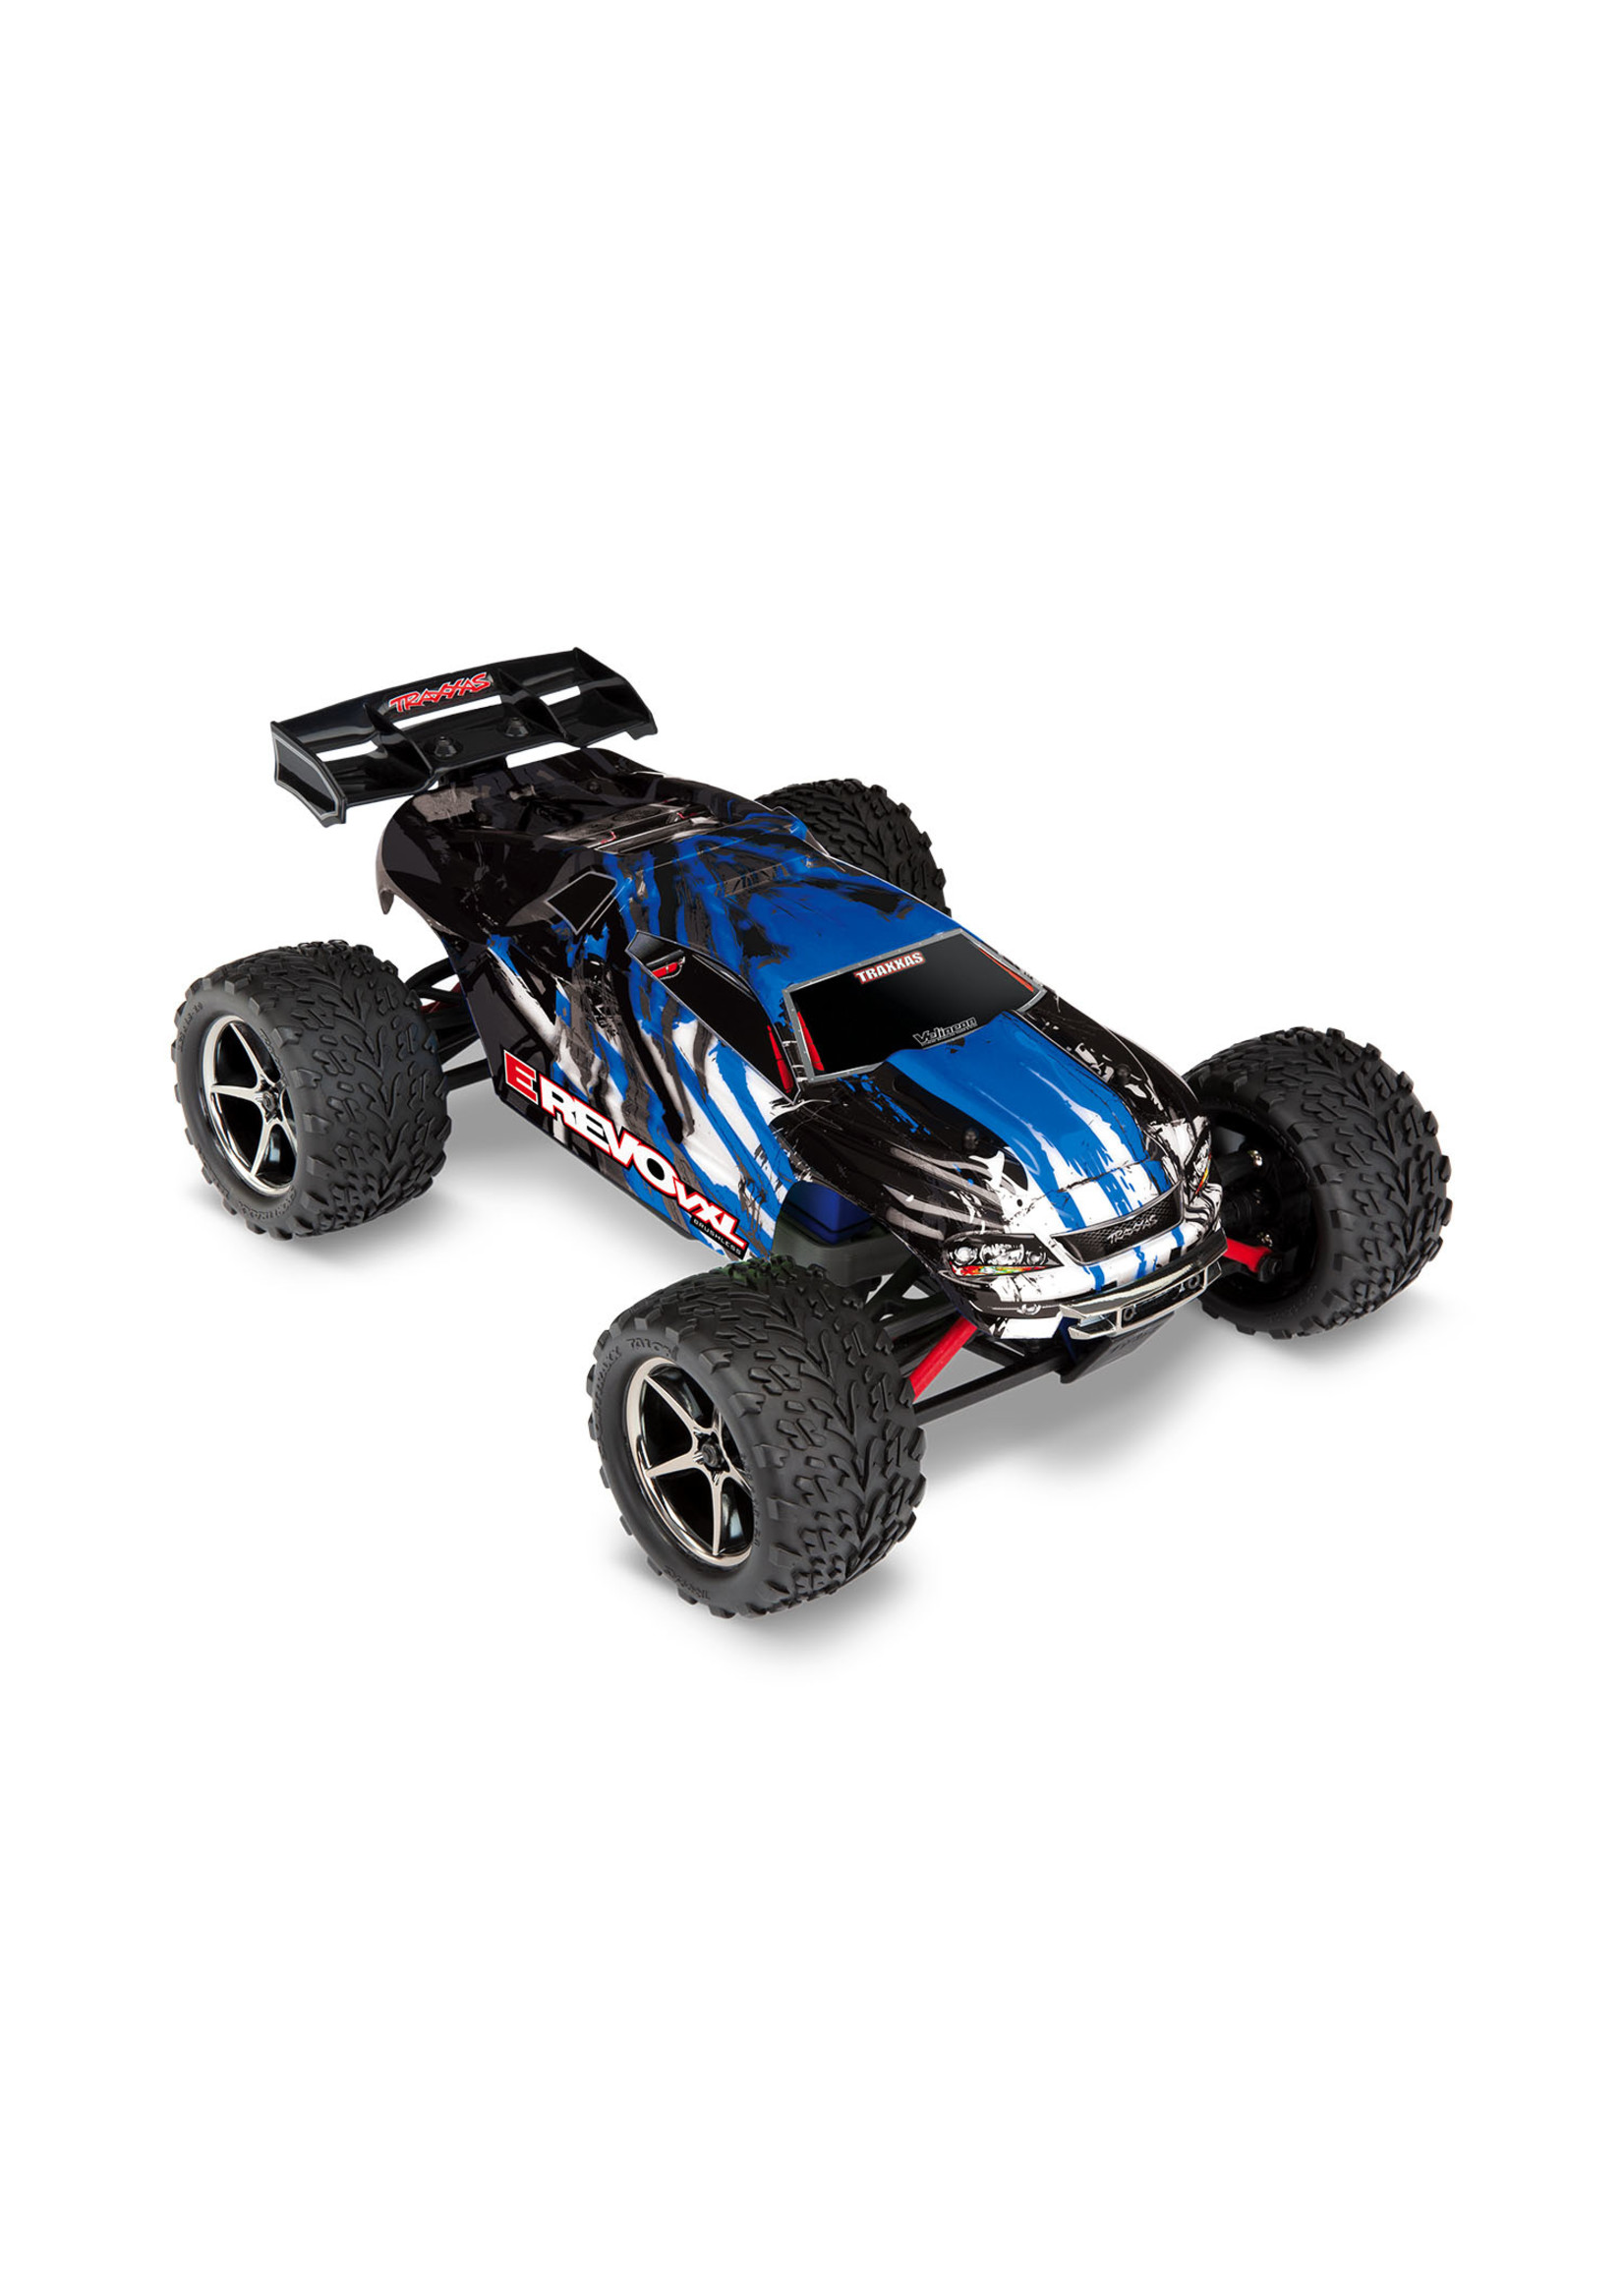 Traxxas TRA71076-3 Traxxas E-Revo VXL: 1/16-Scale 4WD Racing Monster Truck with TQi Traxxas Link Enabled 2.4Ghz Radio System & Traxxas Stability Management (TSM)